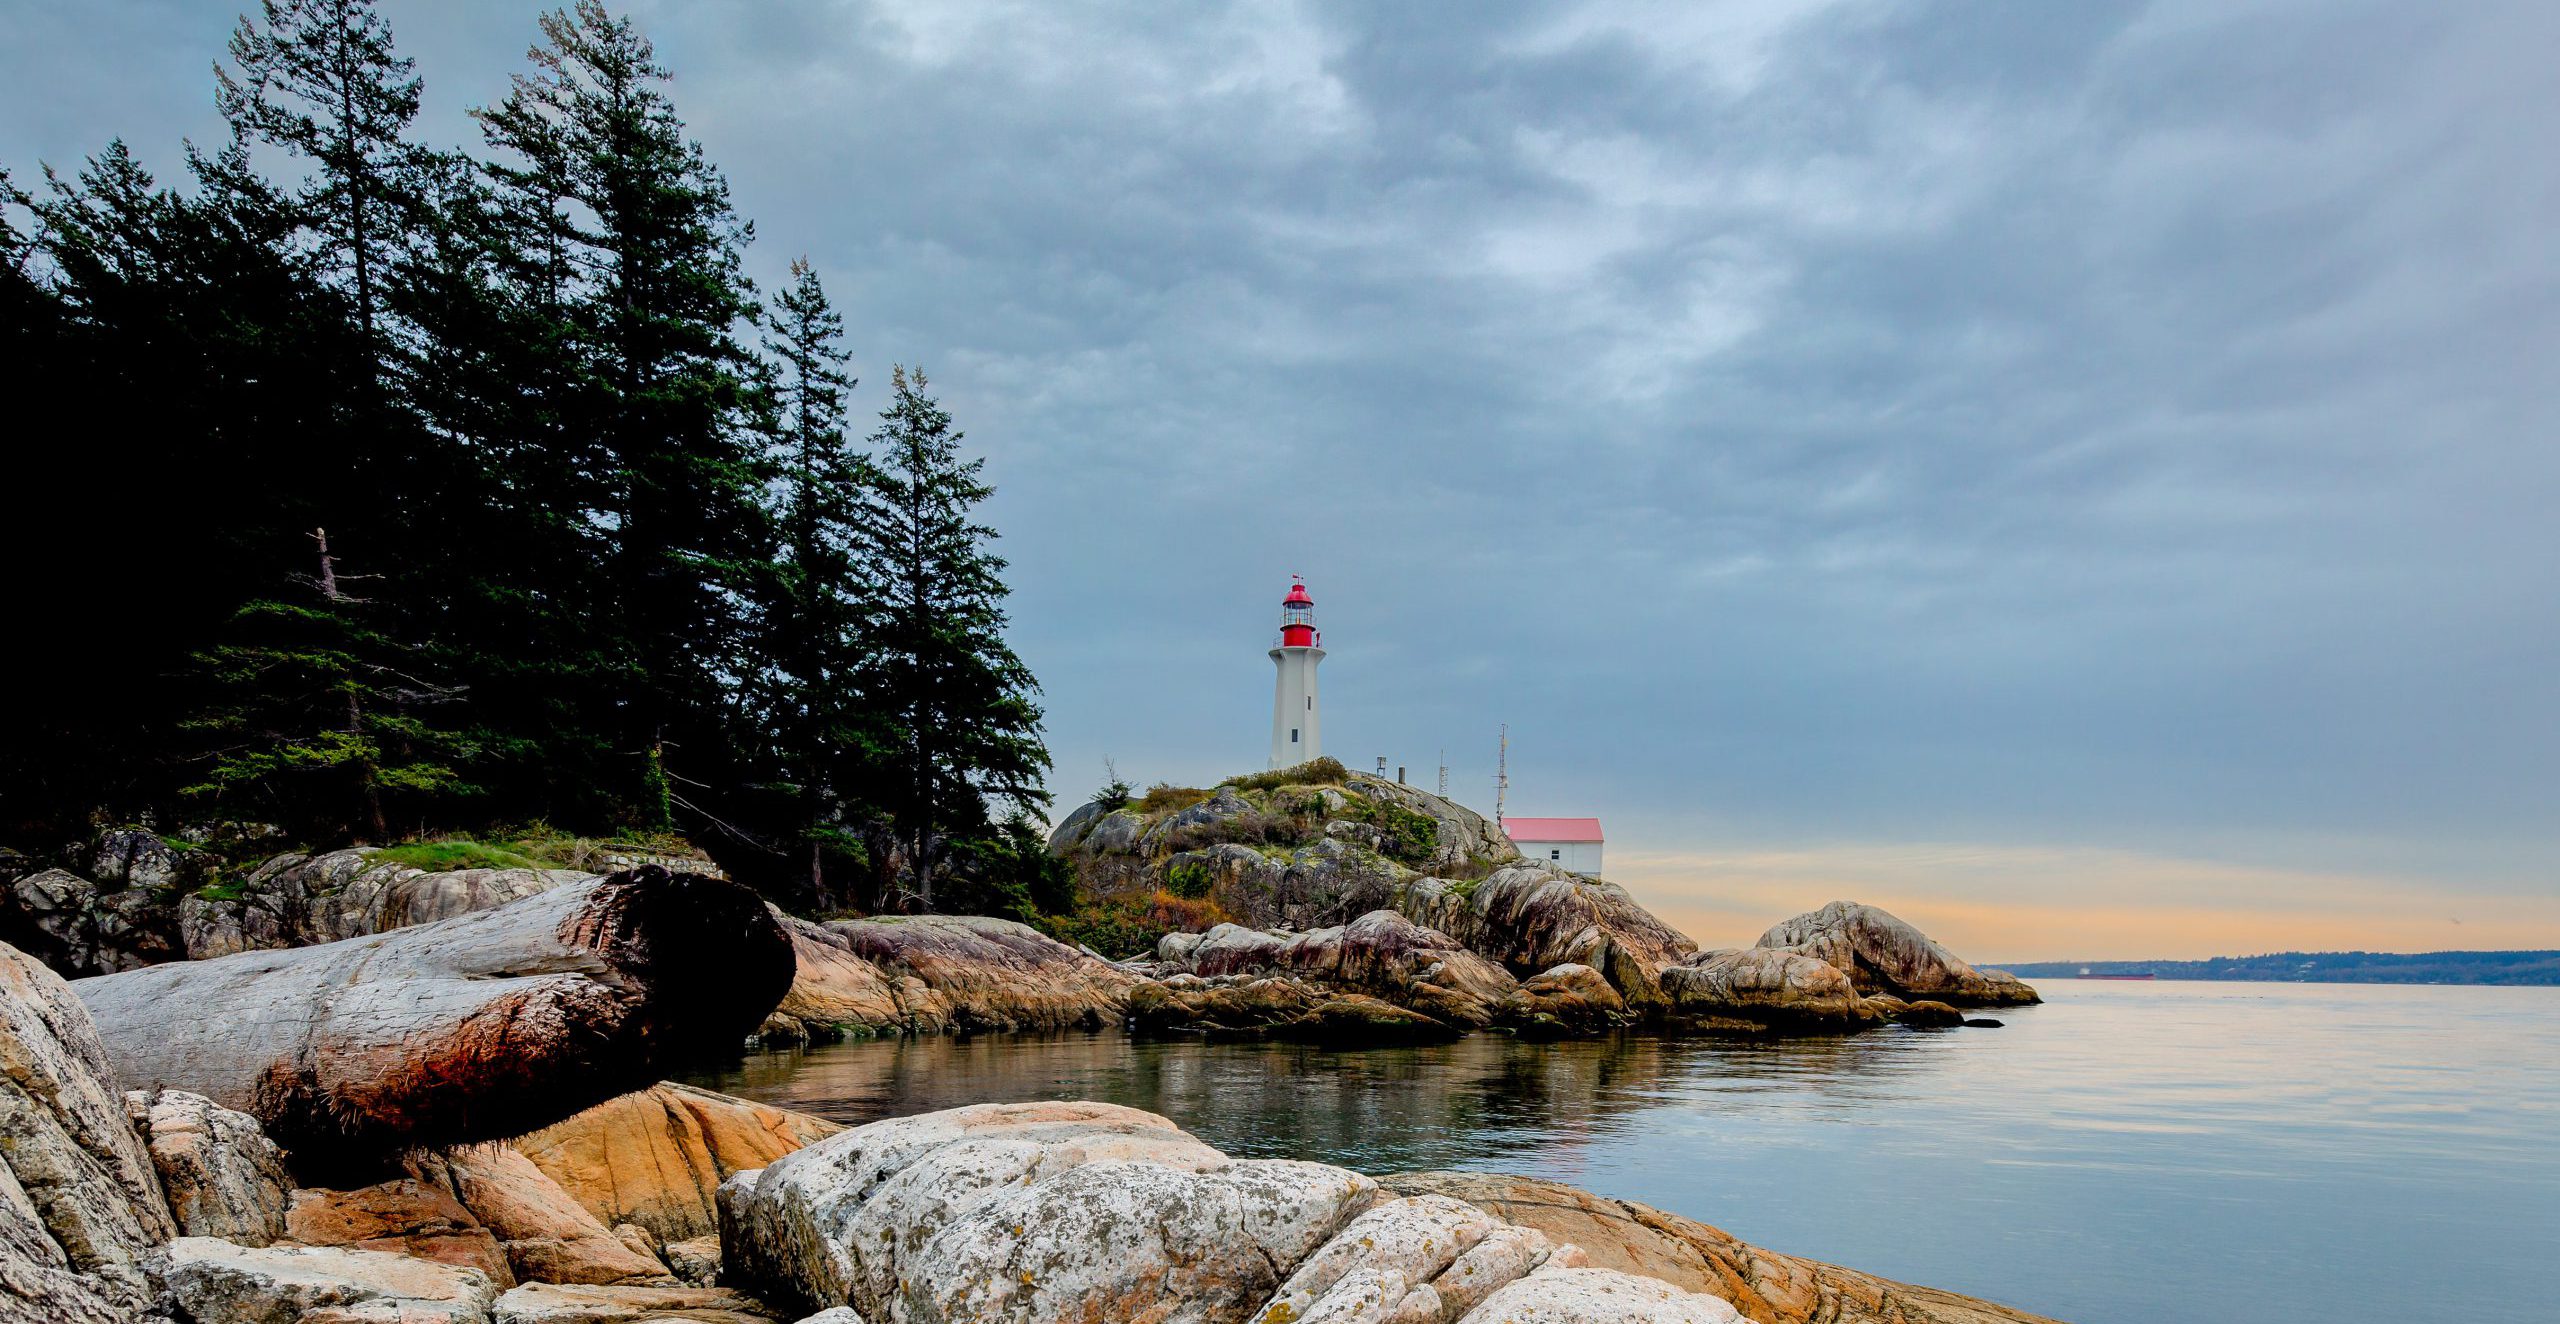 Lighthouse park in West Vancouver